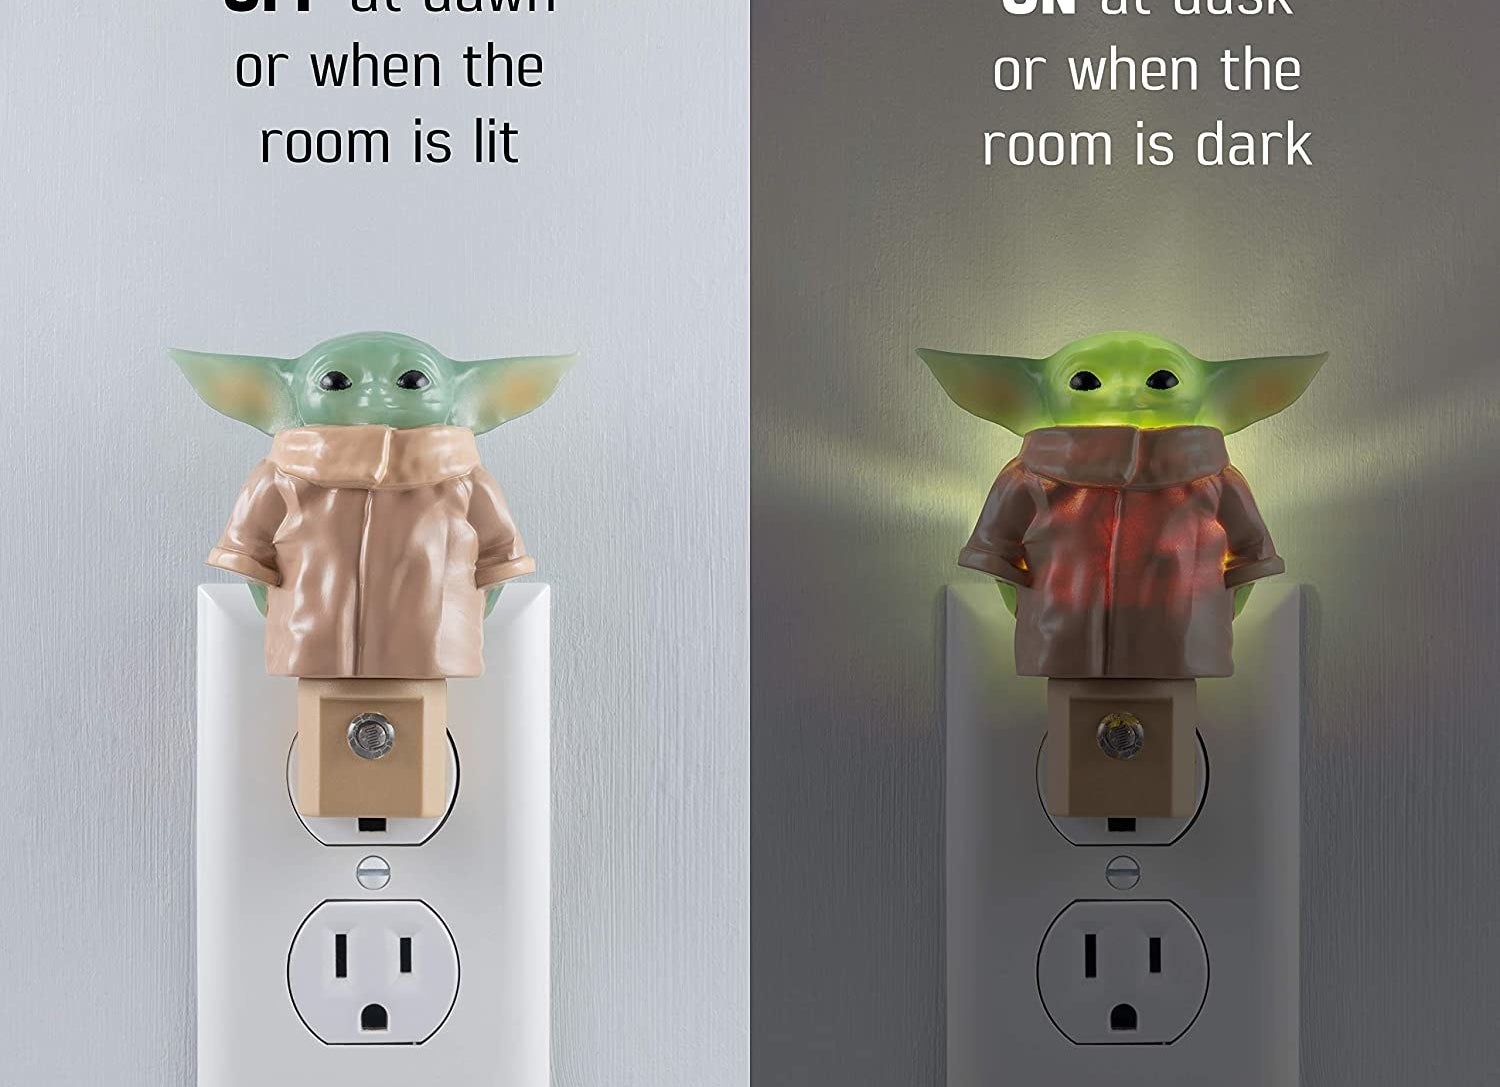 The Yoda light off in the day time and the Yoda light on at night